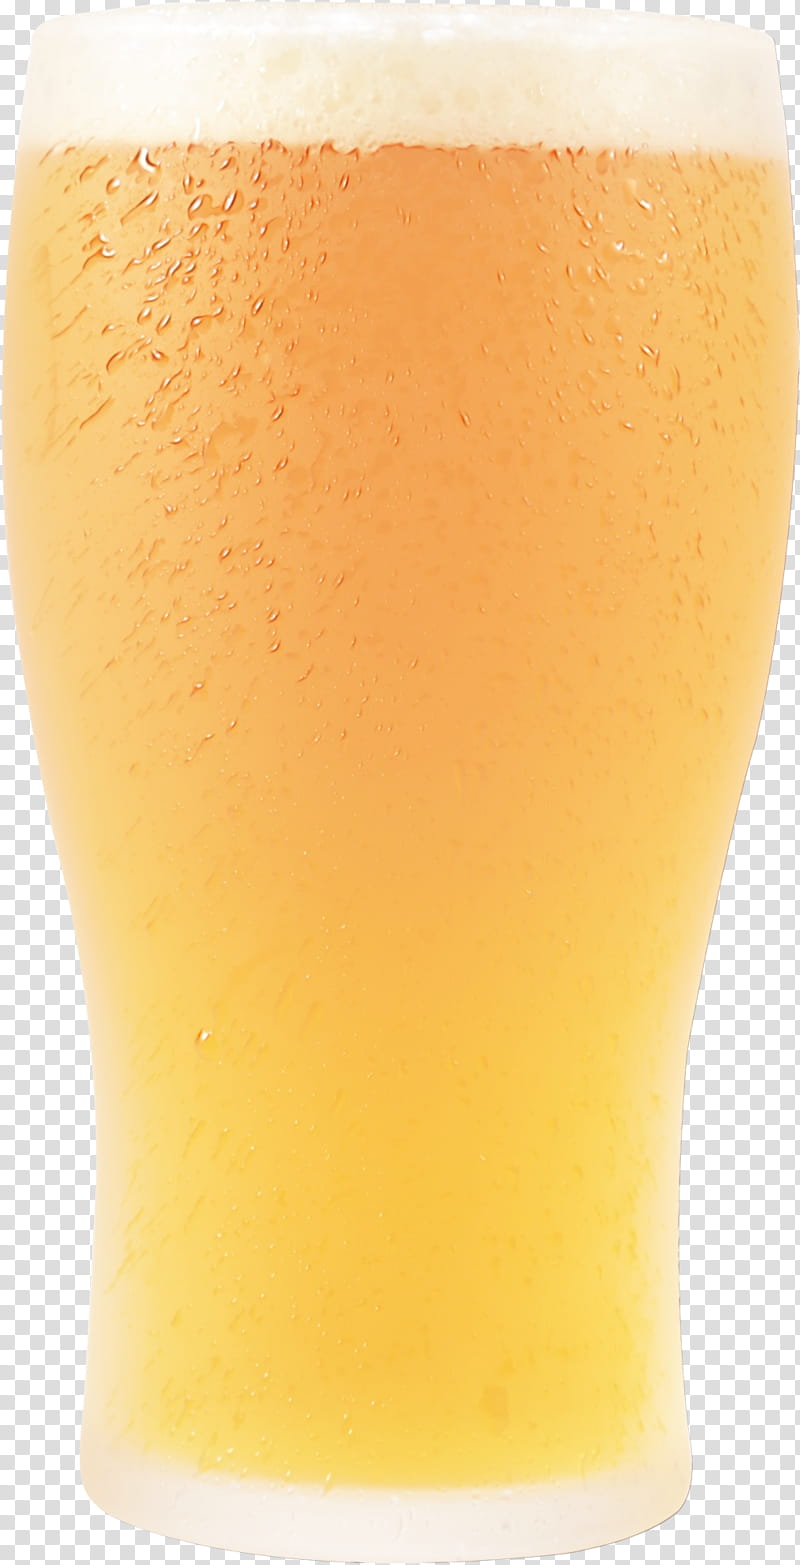 beer glass drink pint glass yellow wheat beer, Watercolor, Paint, Wet Ink, Fizz, Nonalcoholic Beverage, Juice, Champagne Cocktail transparent background PNG clipart